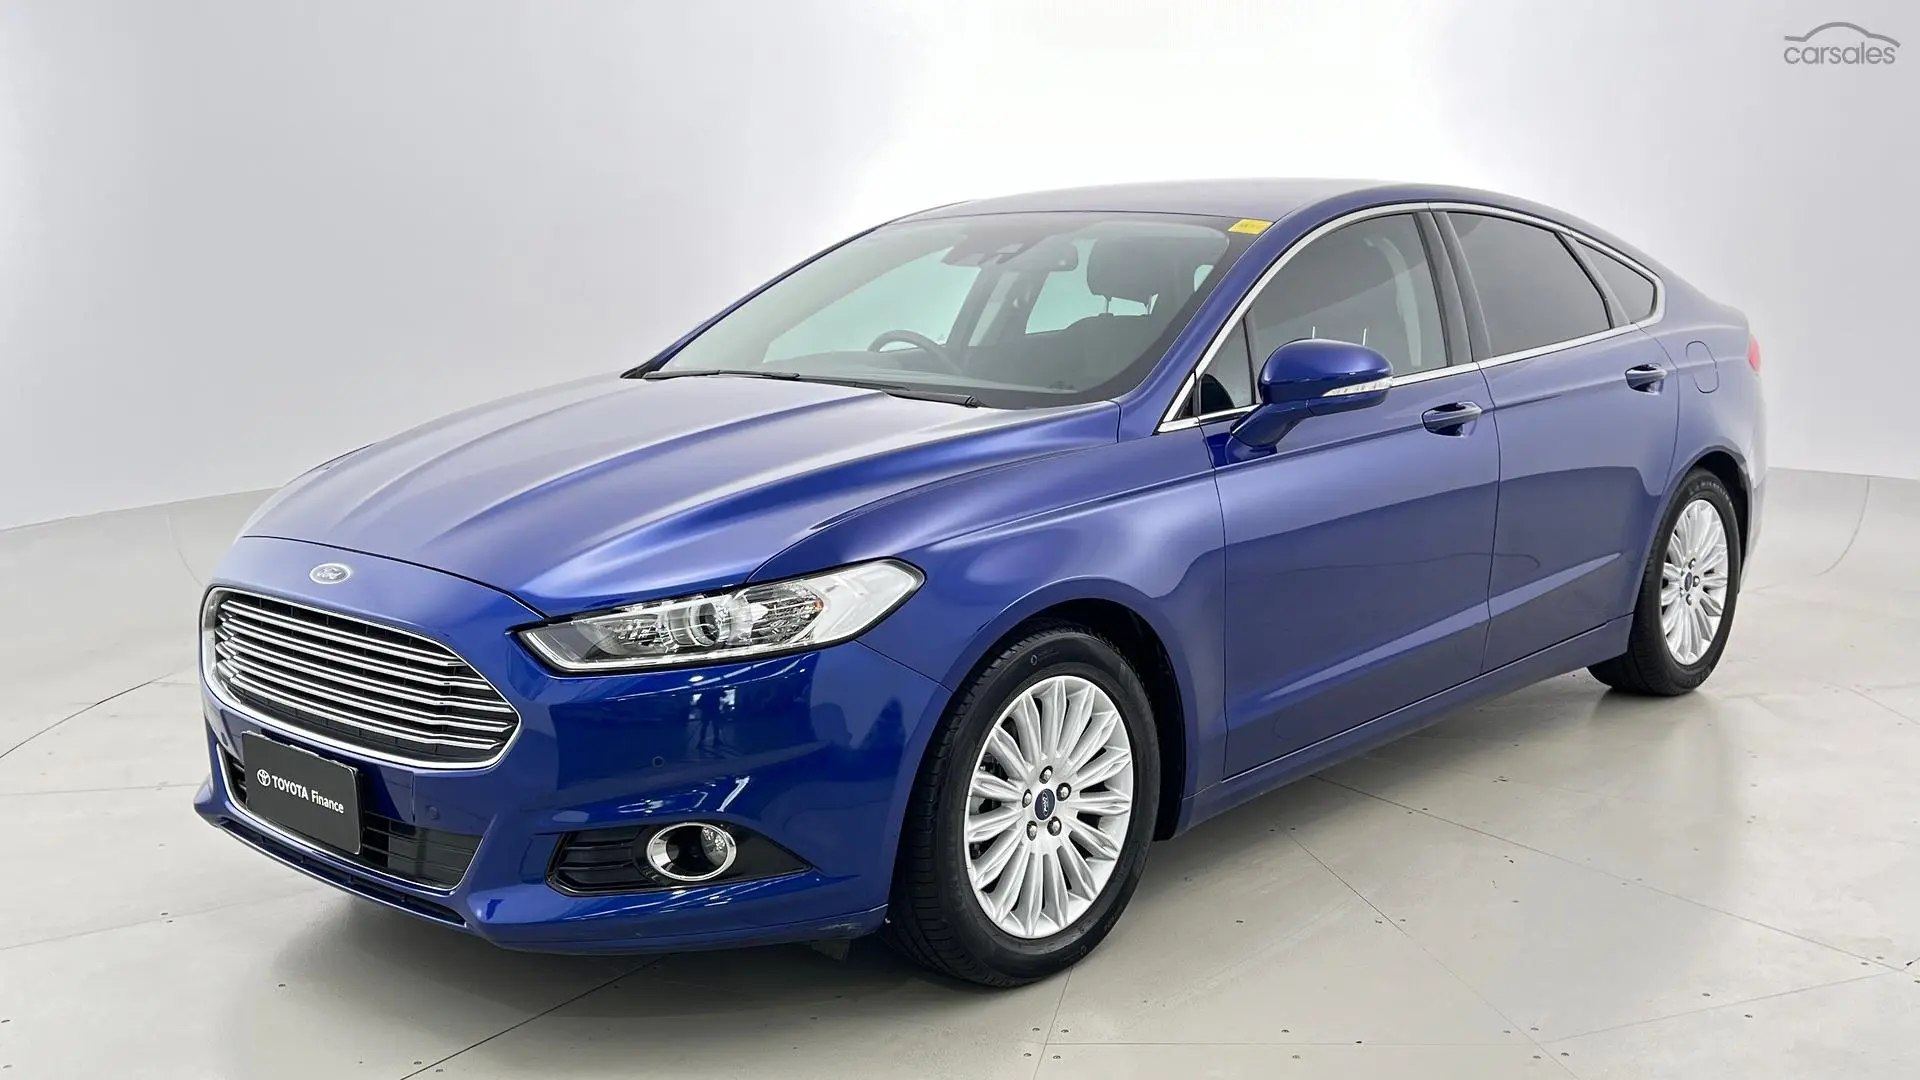 2016 Ford Mondeo Image 9